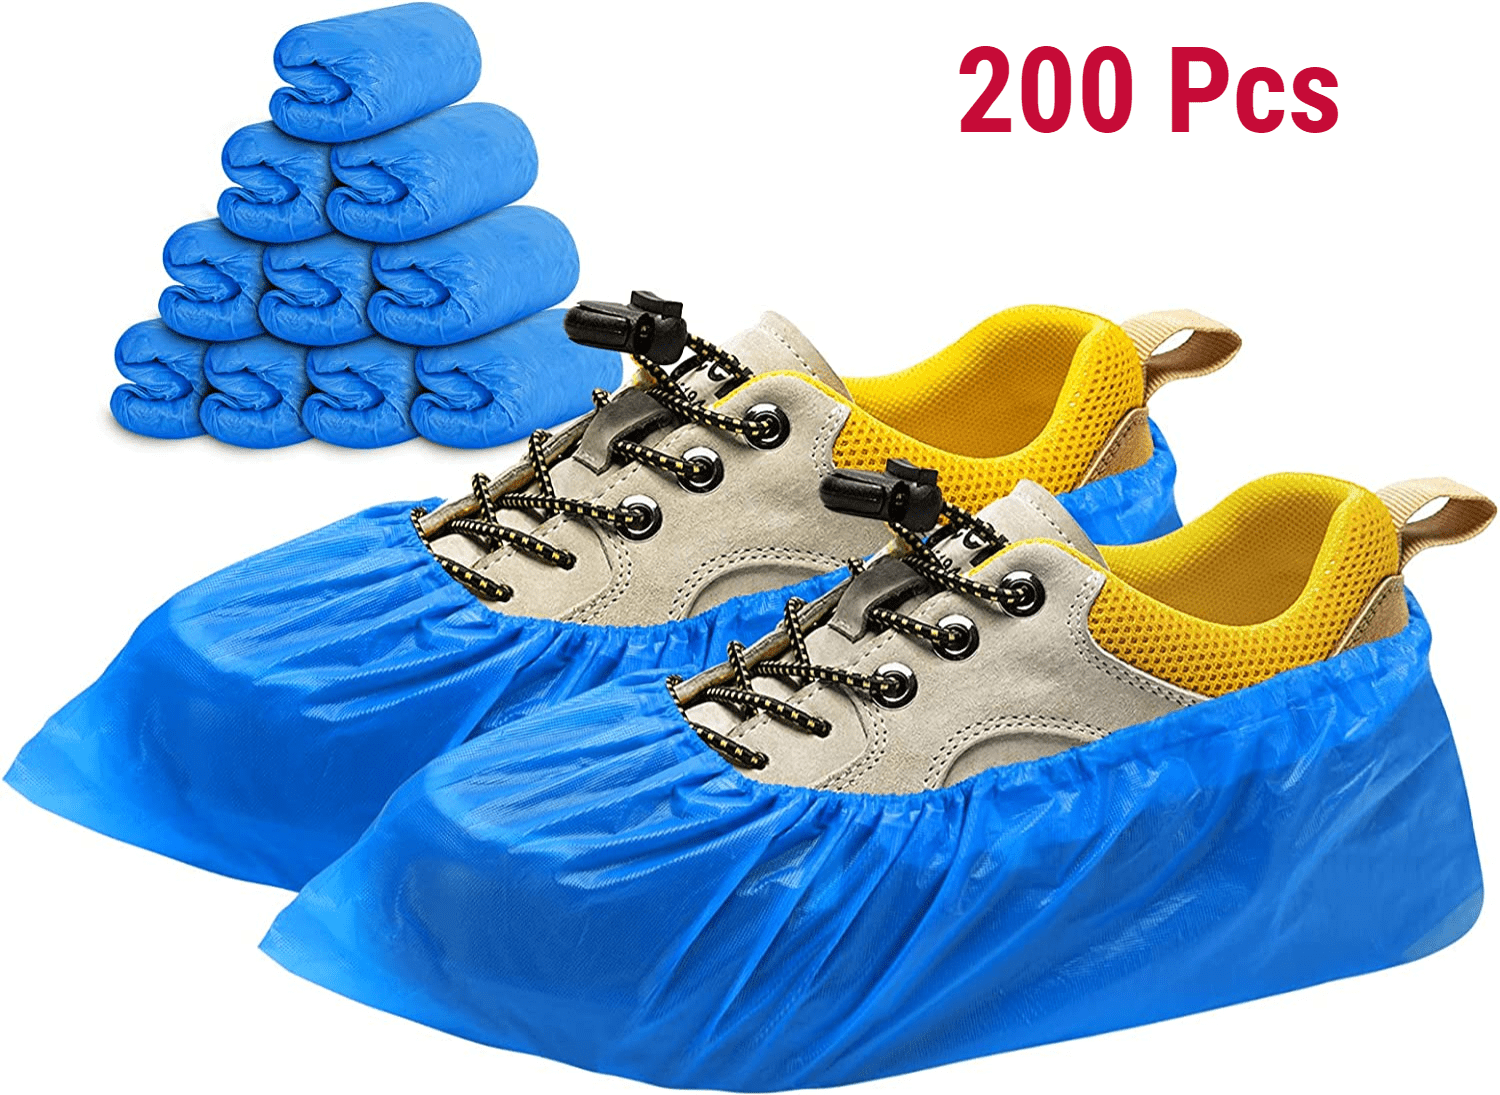 100/200/400Pcs Boot Covers Plastic Shoe Covers Overshoes Waterproof US SELLER 